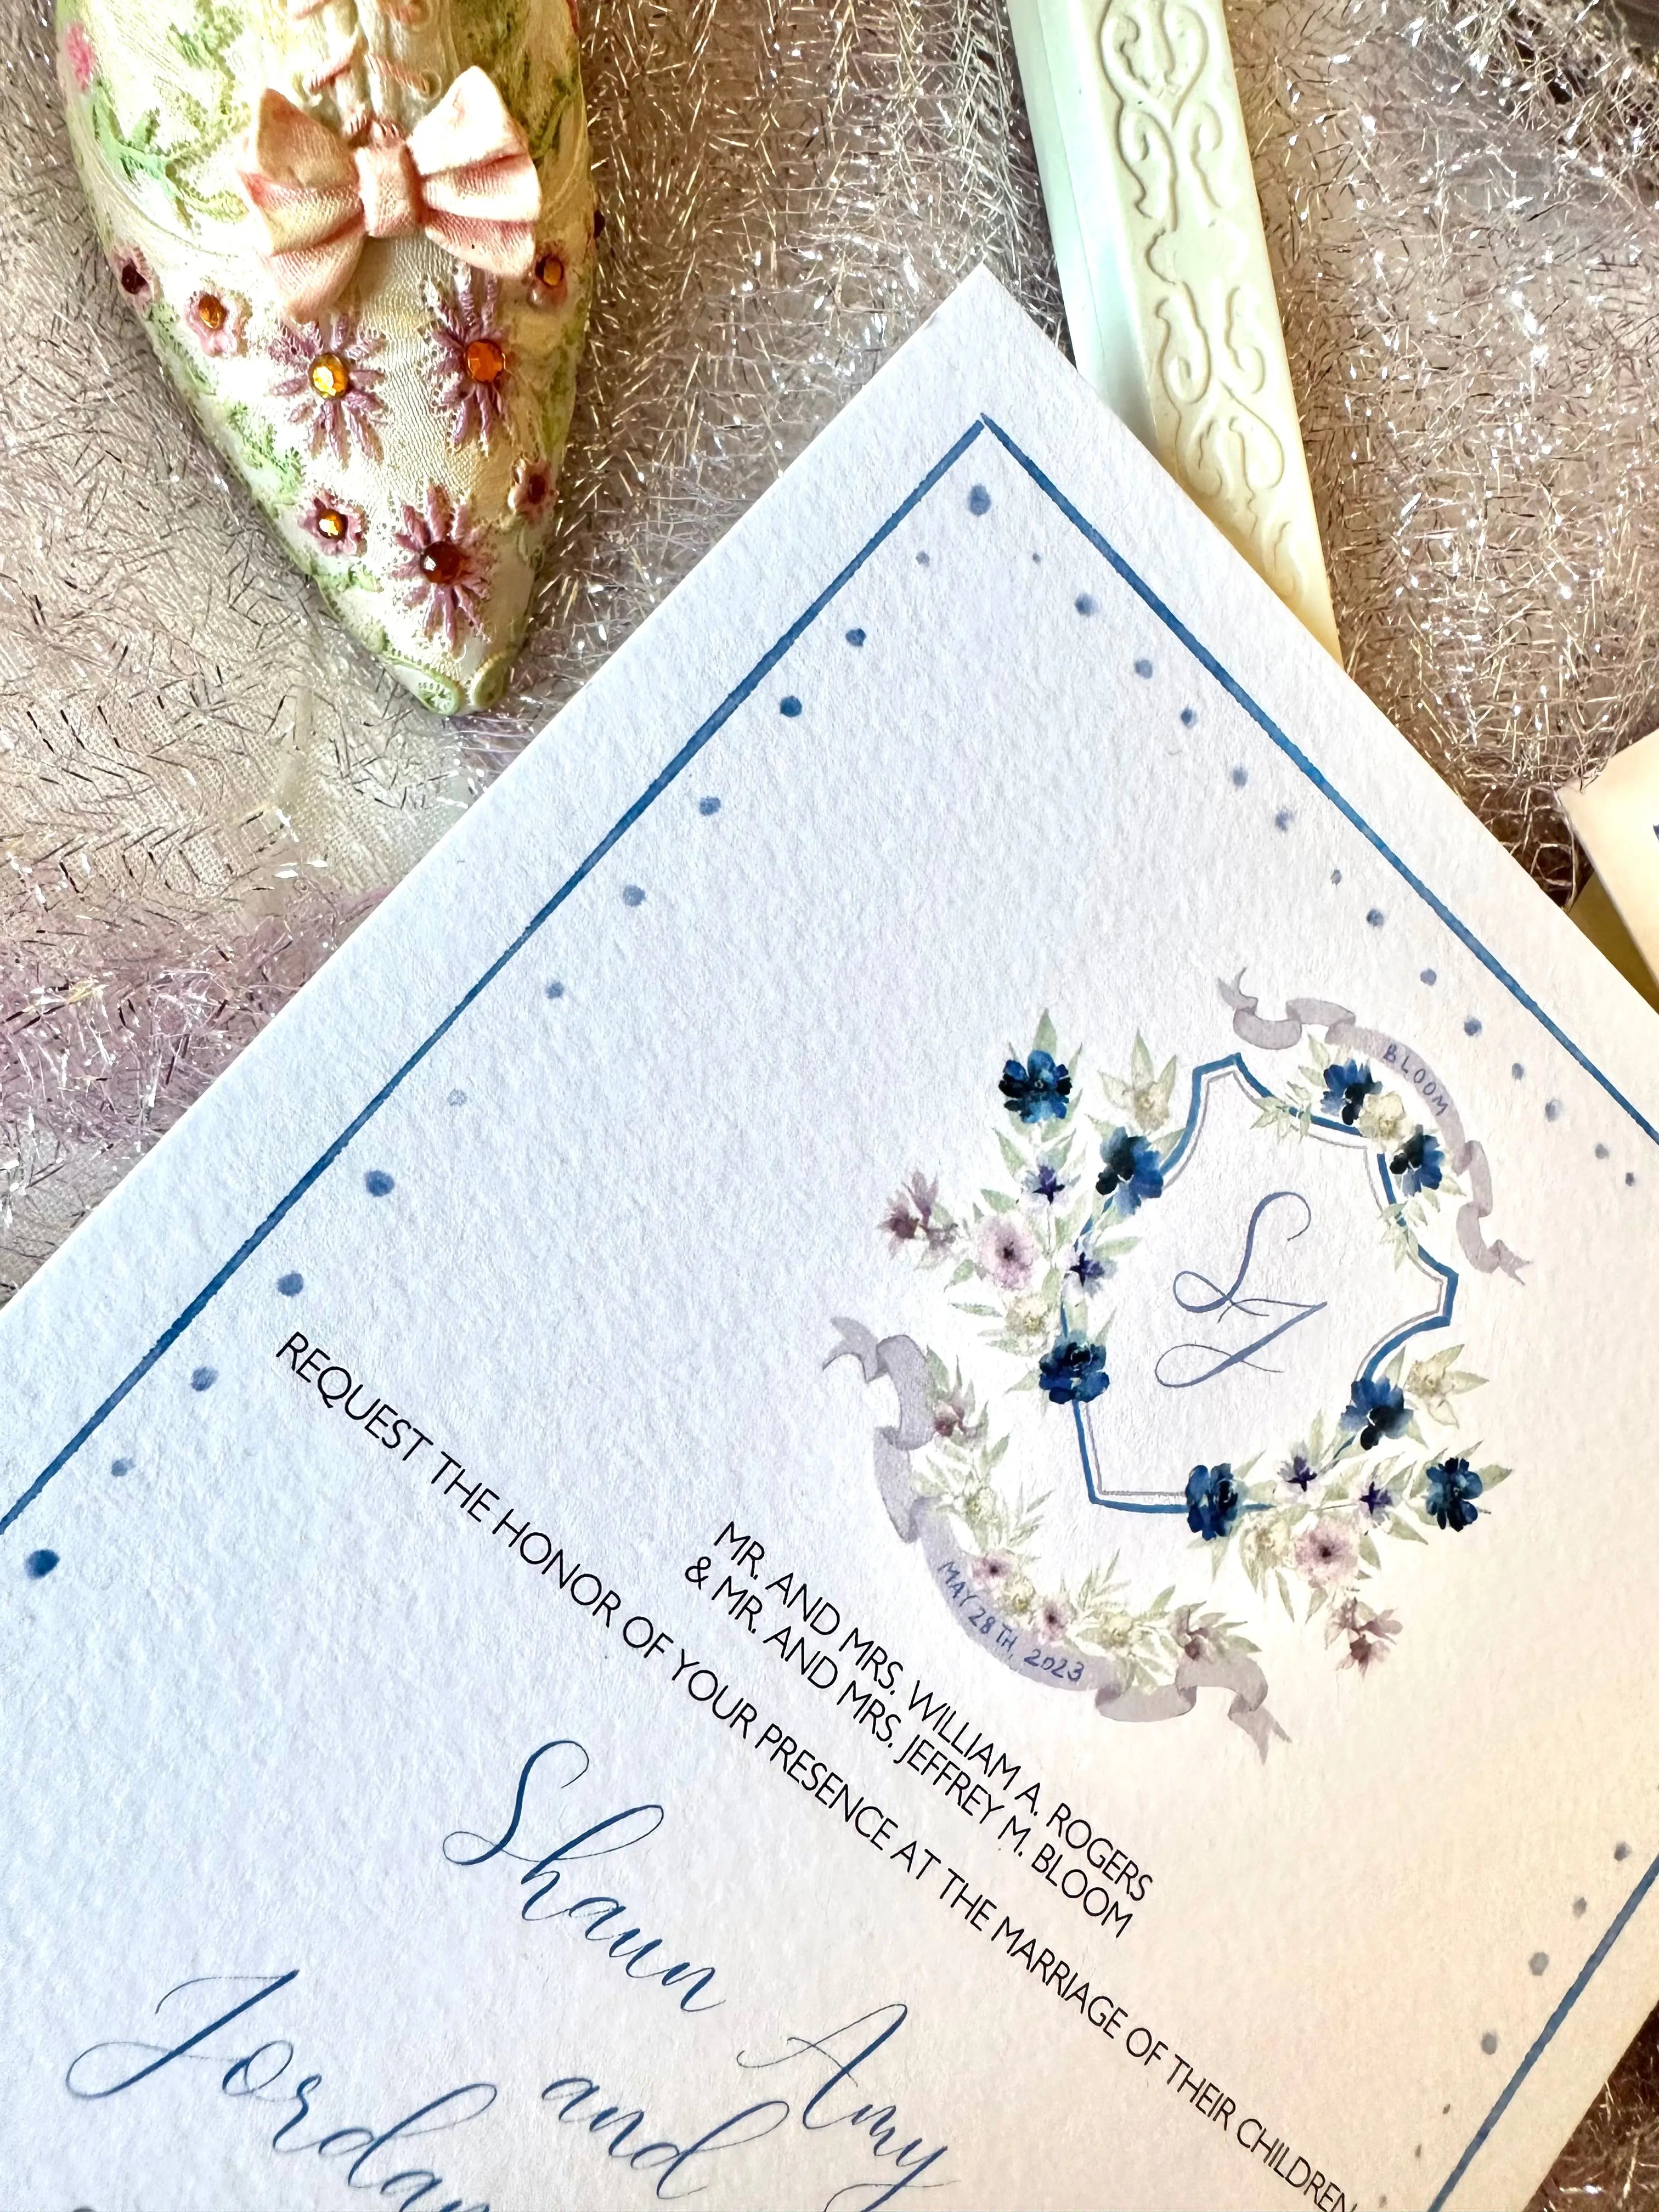 Additional details card with watercolor flowers The Wedding Crest Lab